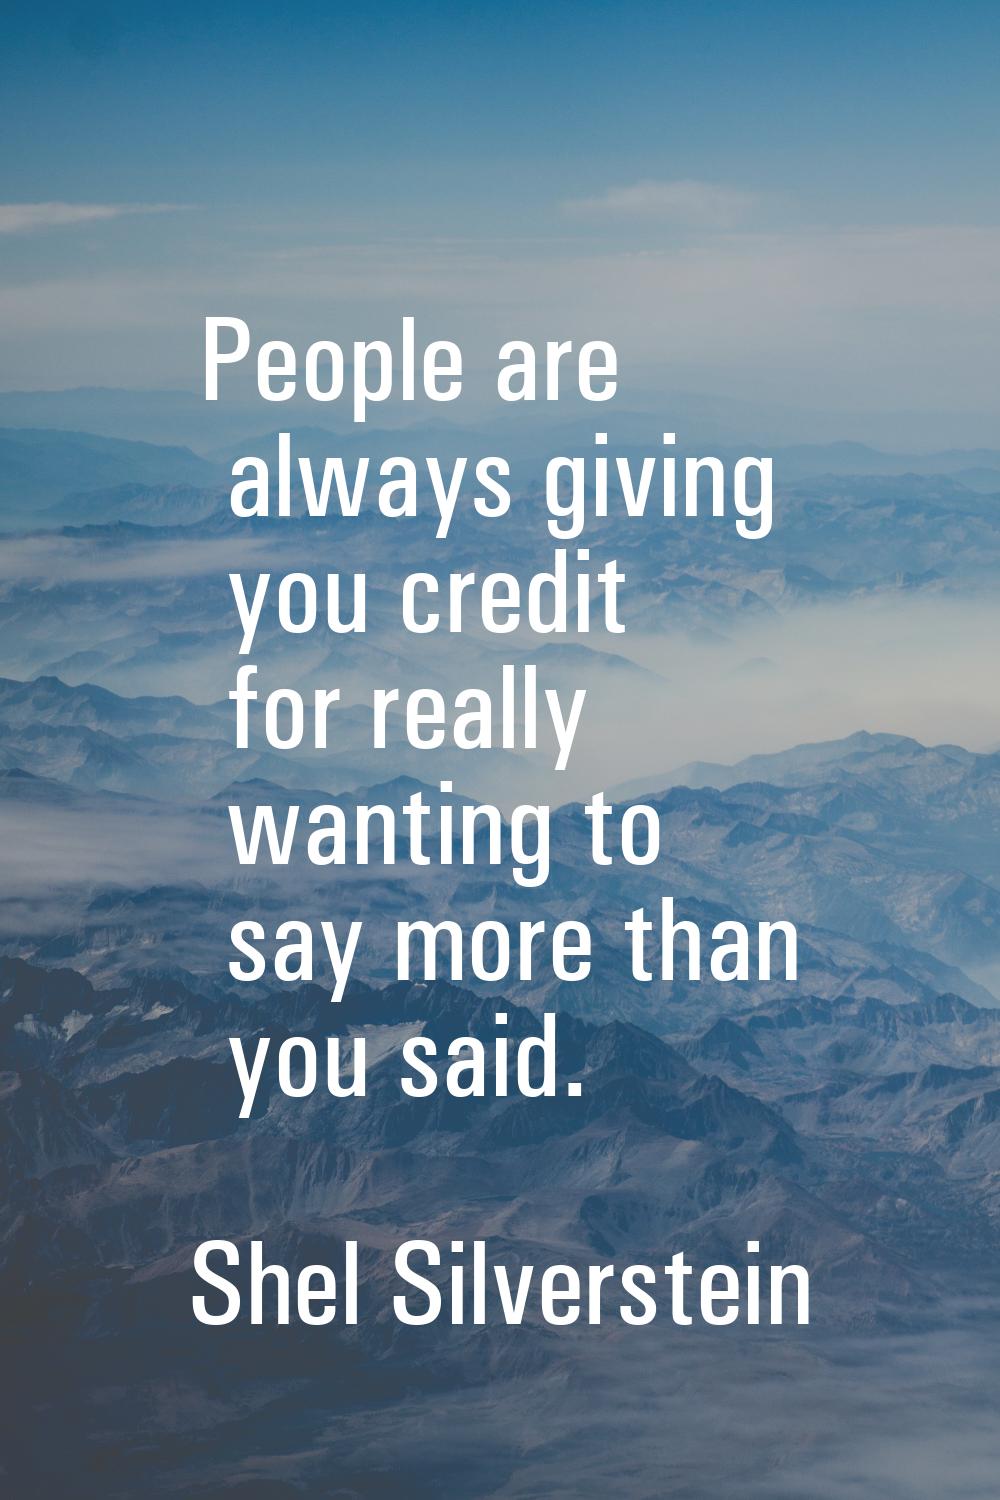 People are always giving you credit for really wanting to say more than you said.